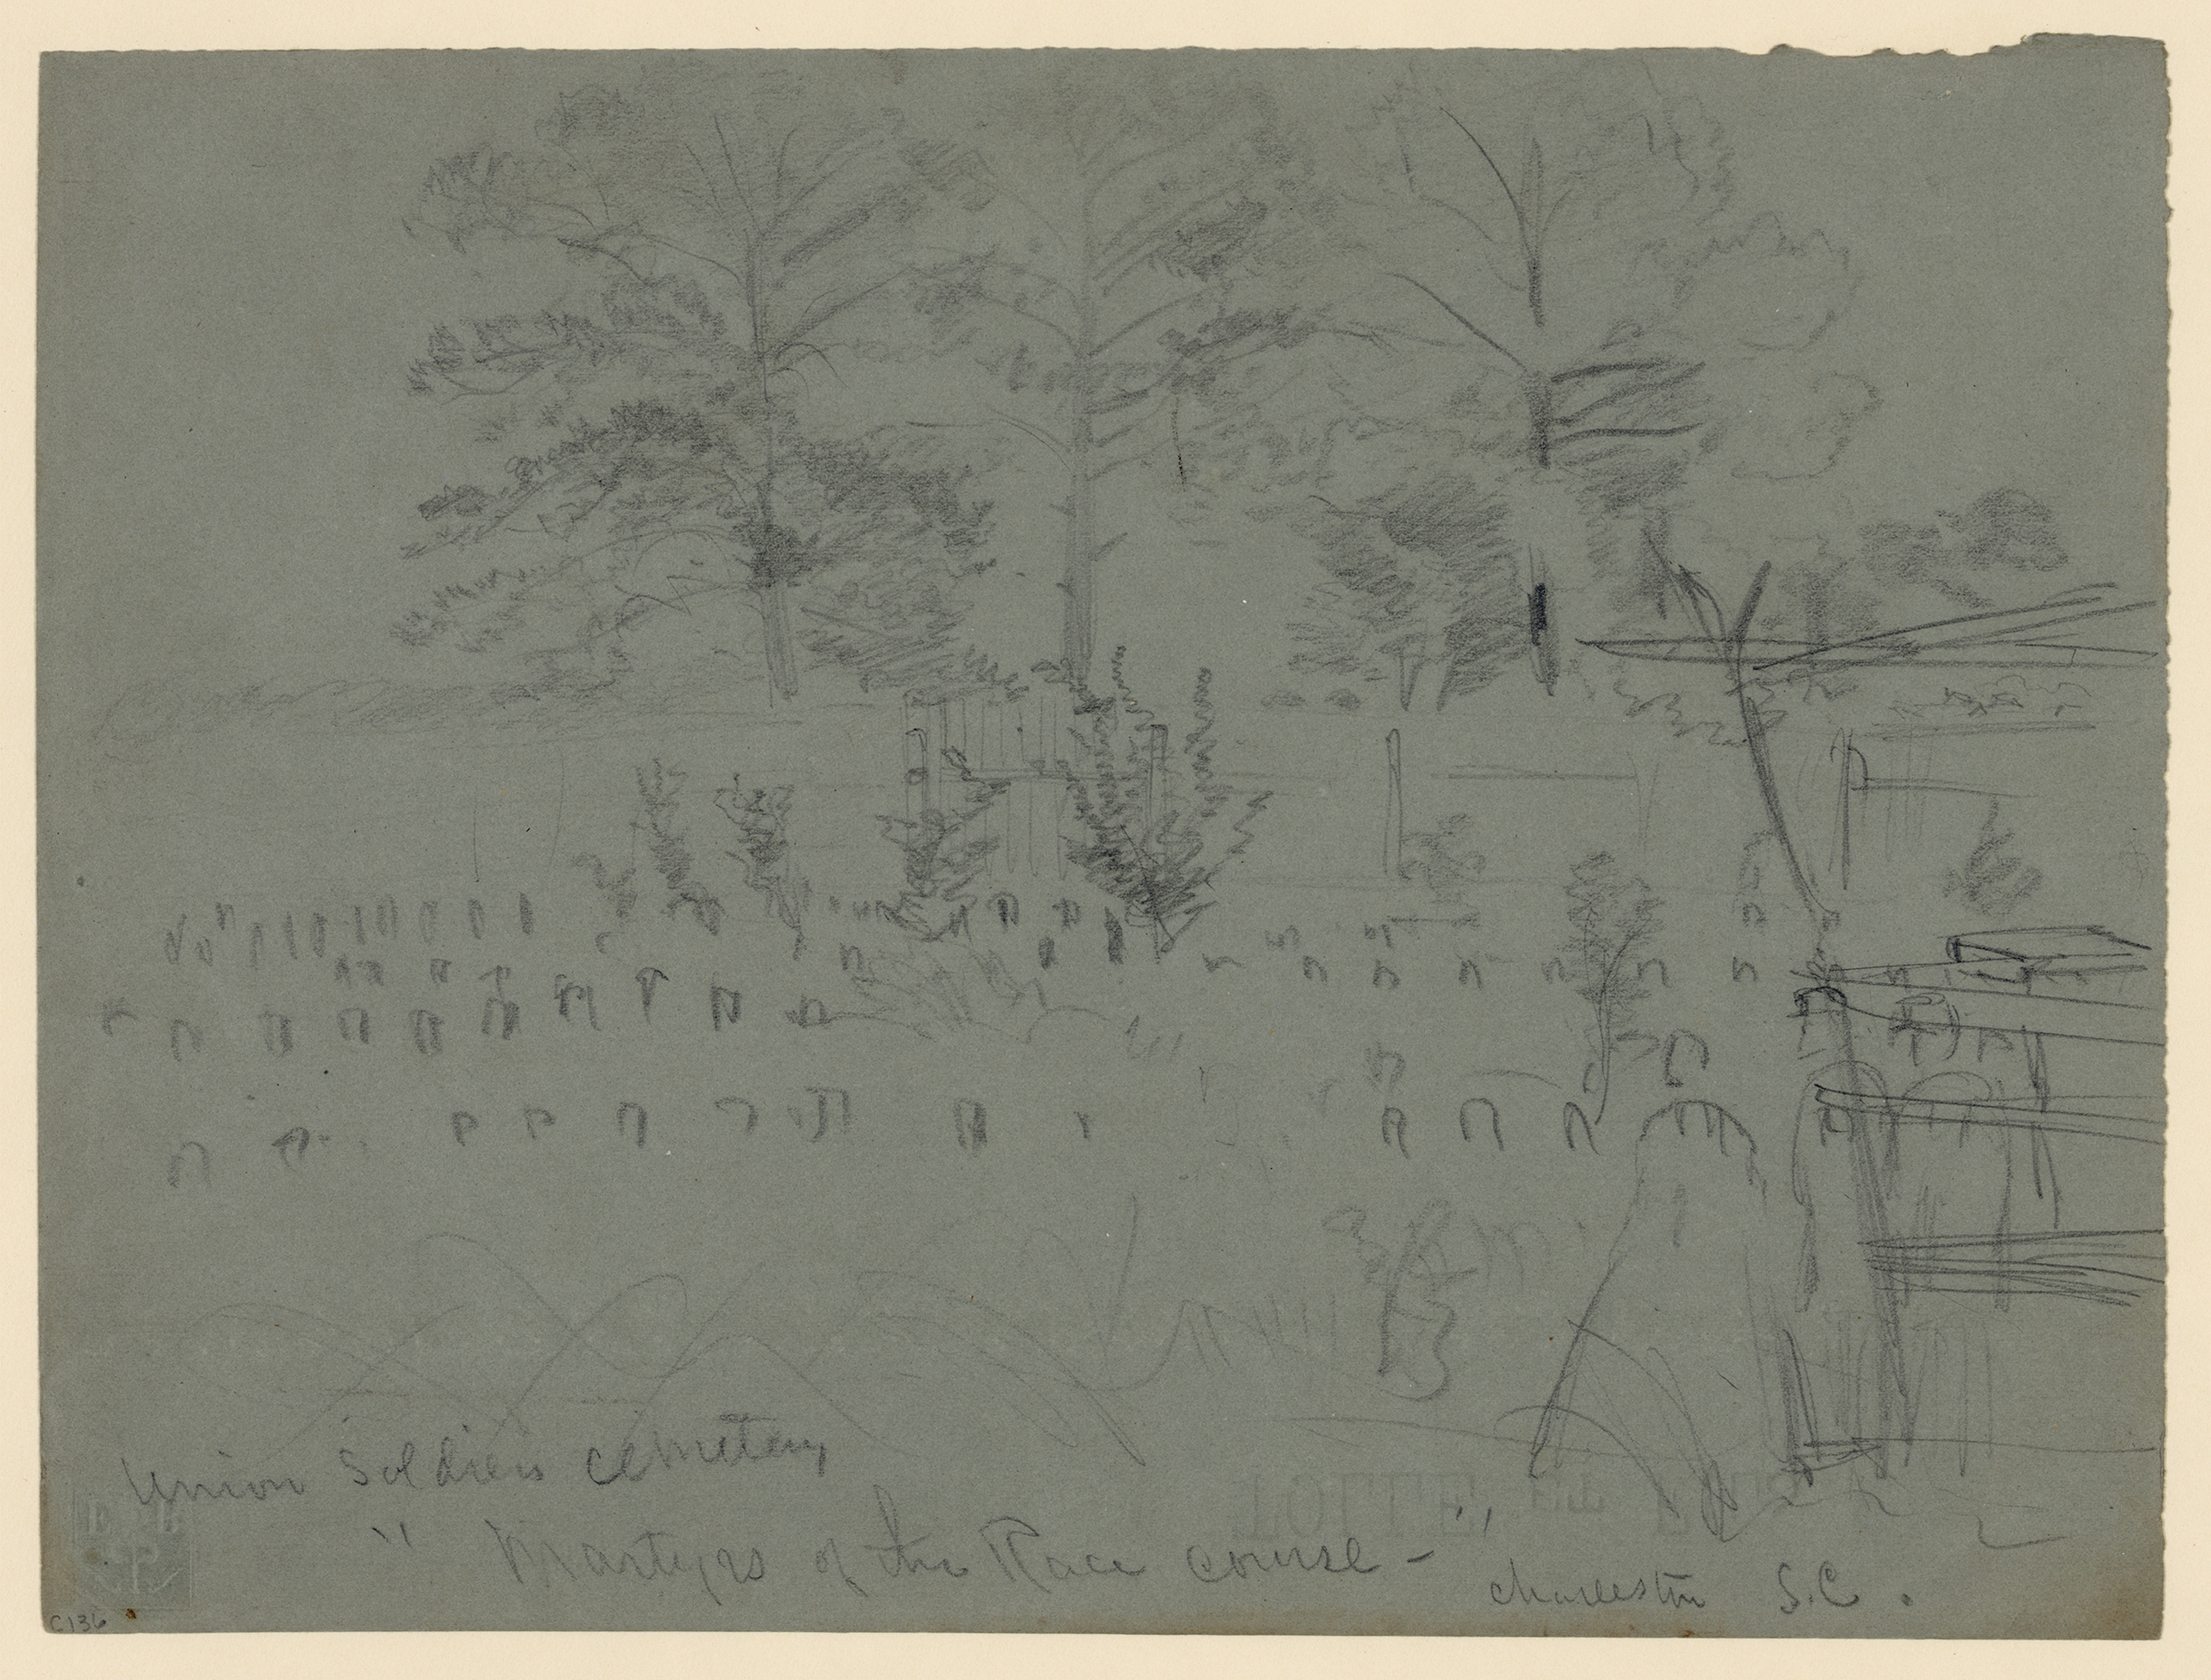 An Alfred Waud illustration of the.Union soldiers cemetery known as "Martyrs of the Race course" in Charleston, S.C. (Morgan collection of Civil War drawings at the Library of Congress)